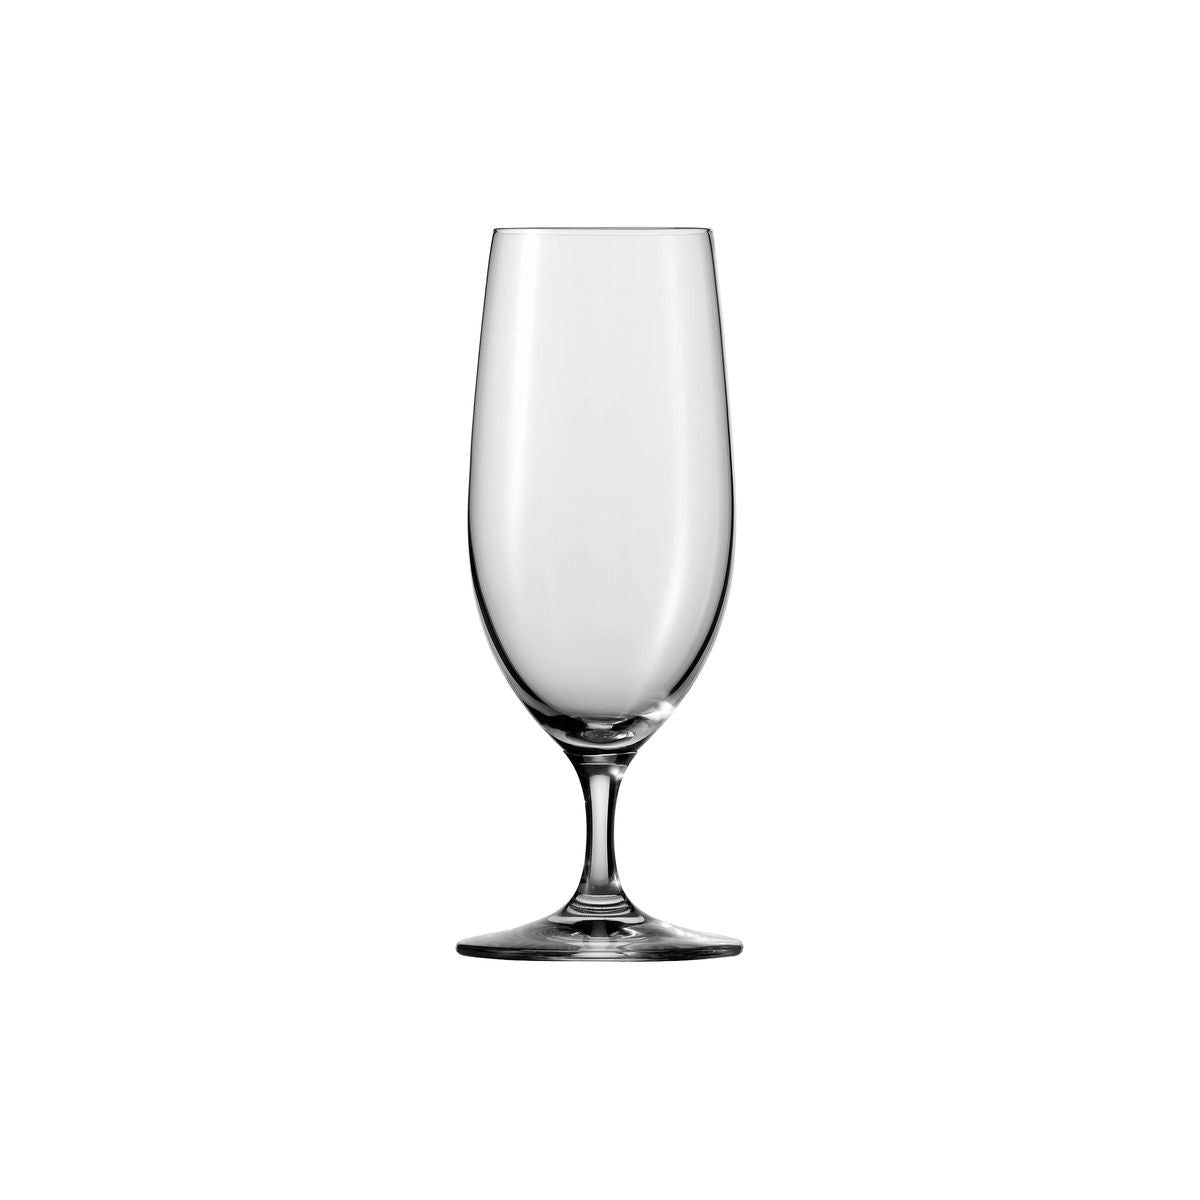 Beer Tulip Glass - 360Ml, Classico from Schott Zwiesel. made out of Glass and sold in boxes of 6. Hospitality quality at wholesale price with The Flying Fork! 